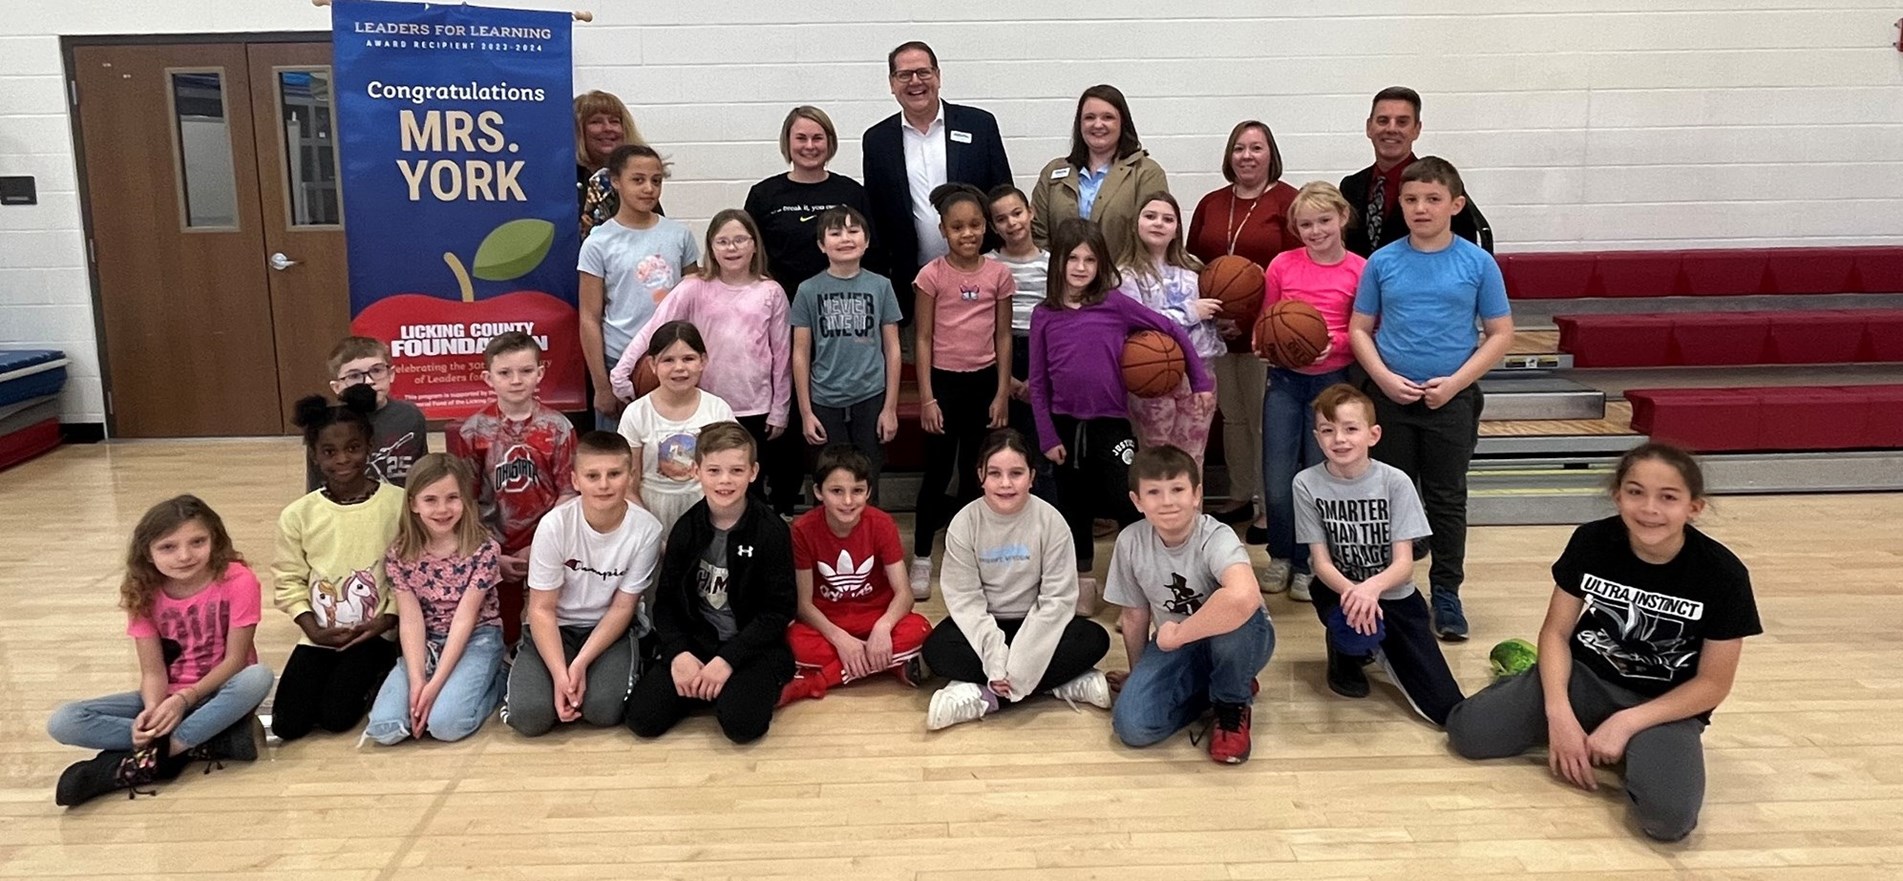 Leaders for Learning Award-Winner Megan York is surrounded by Licking County Foundation, students and District administrators in elementary school gym.